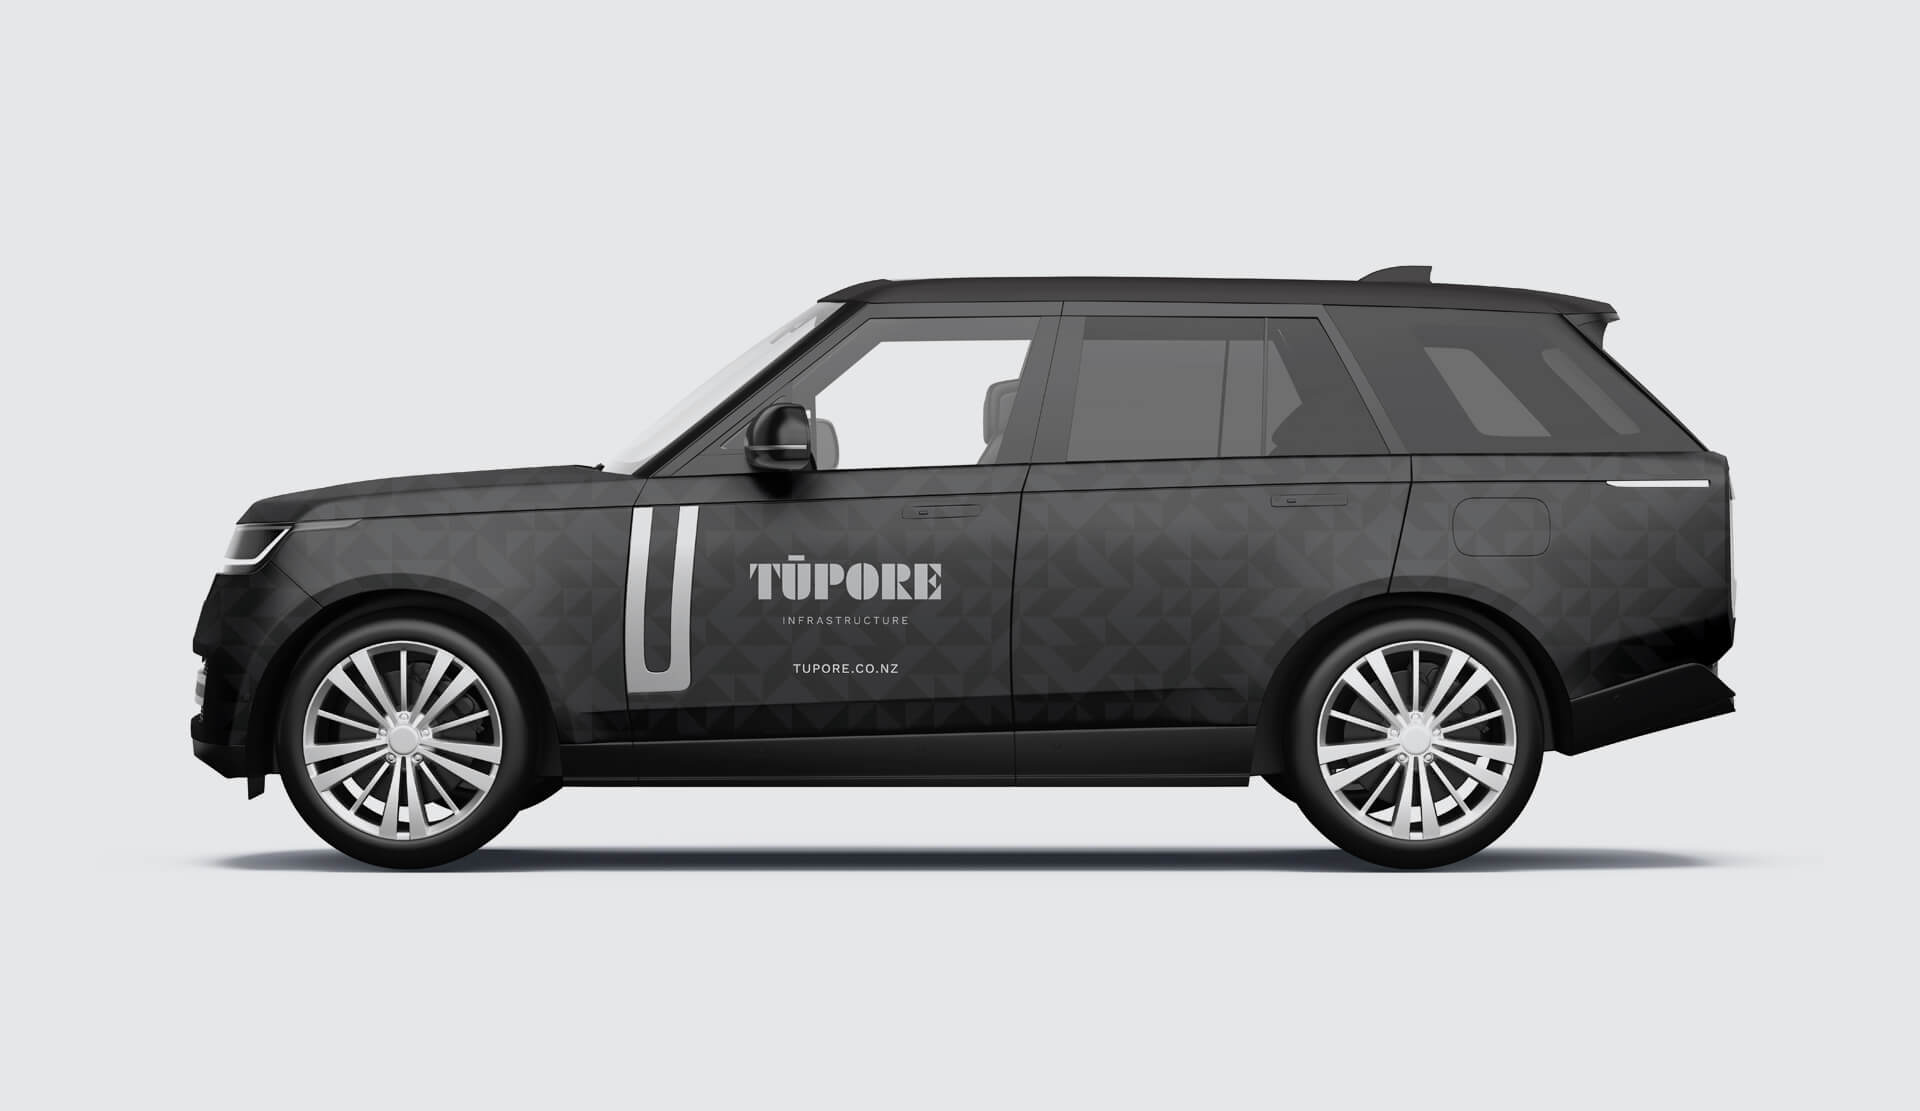 Many-Hats-Tupore-infrastructure-range-rover-full-wrap